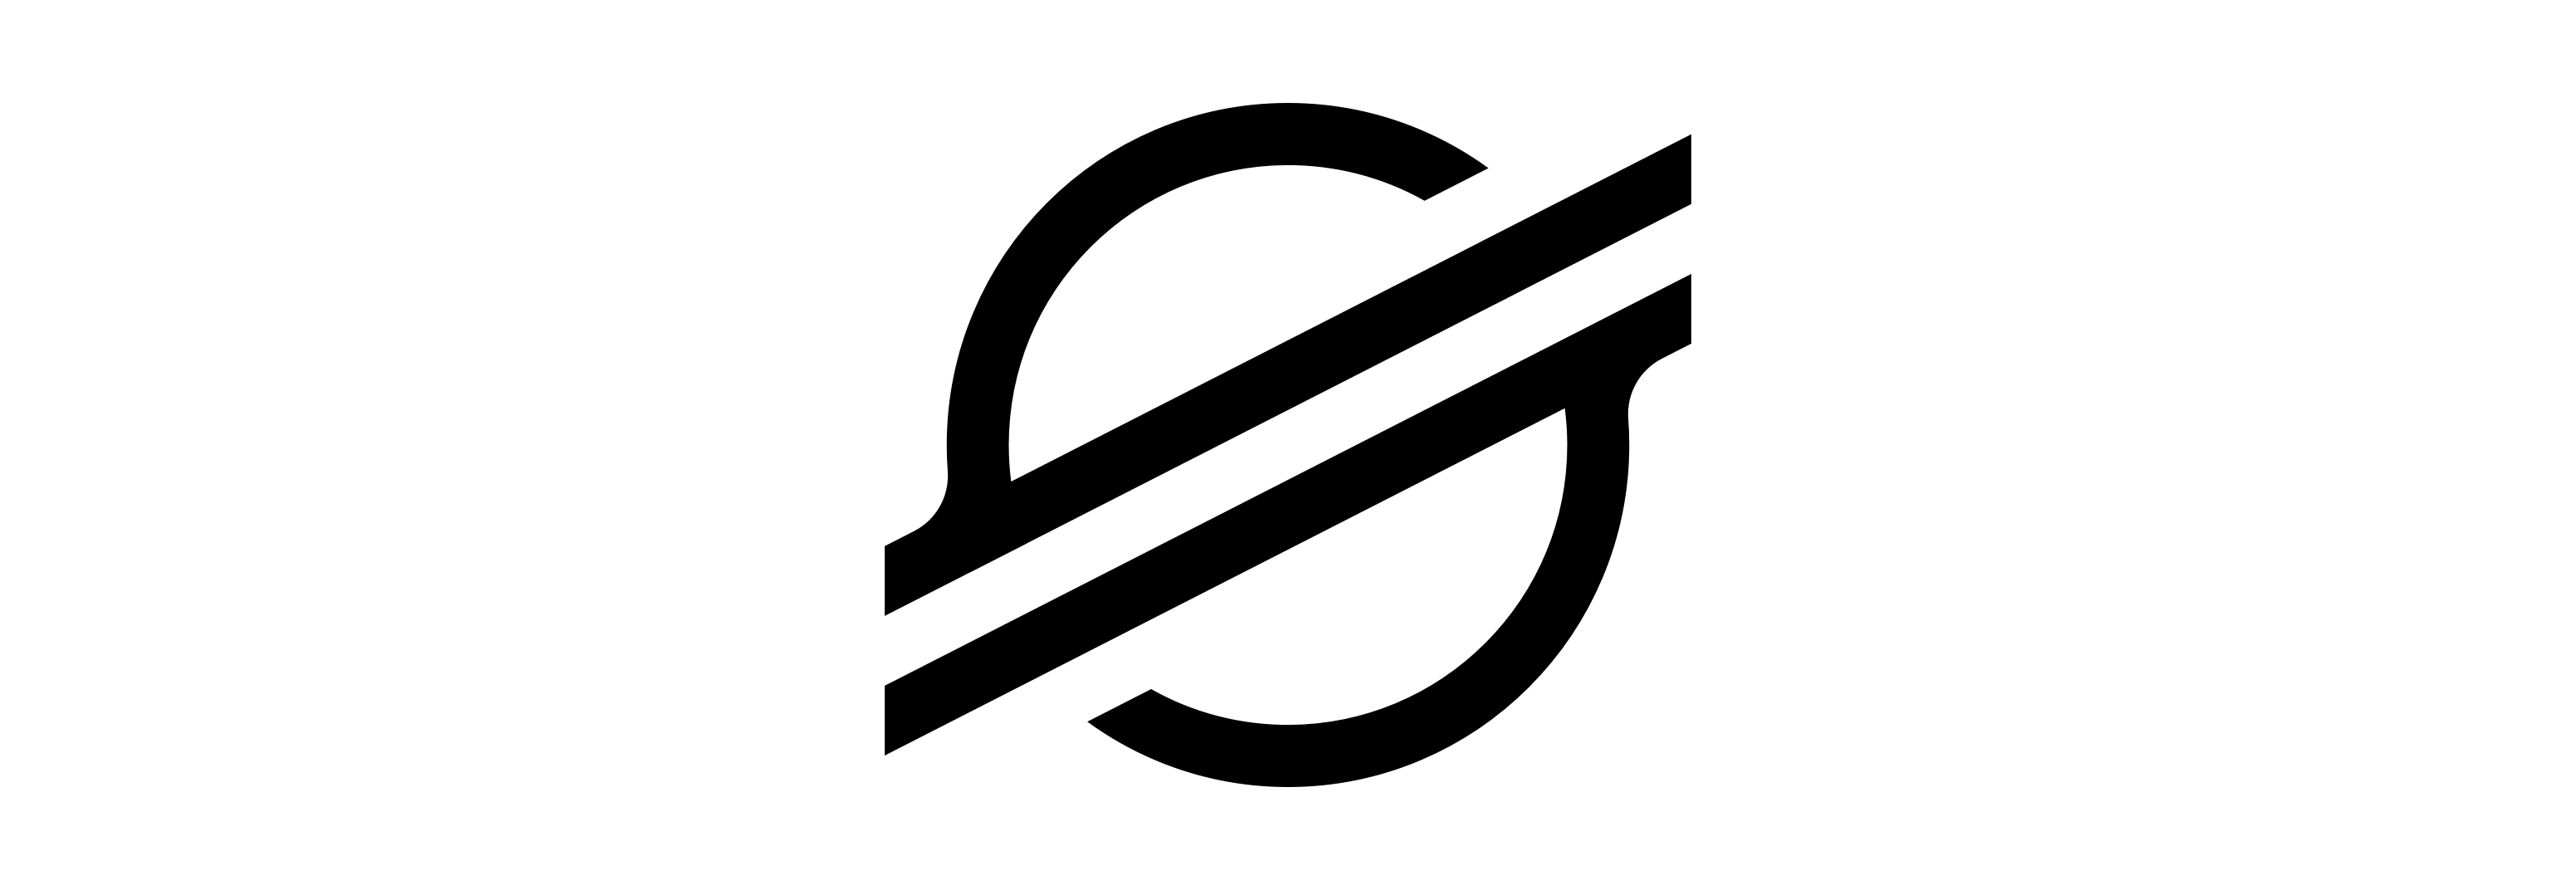 Currency Logo - Announcing the New Stellar Logo